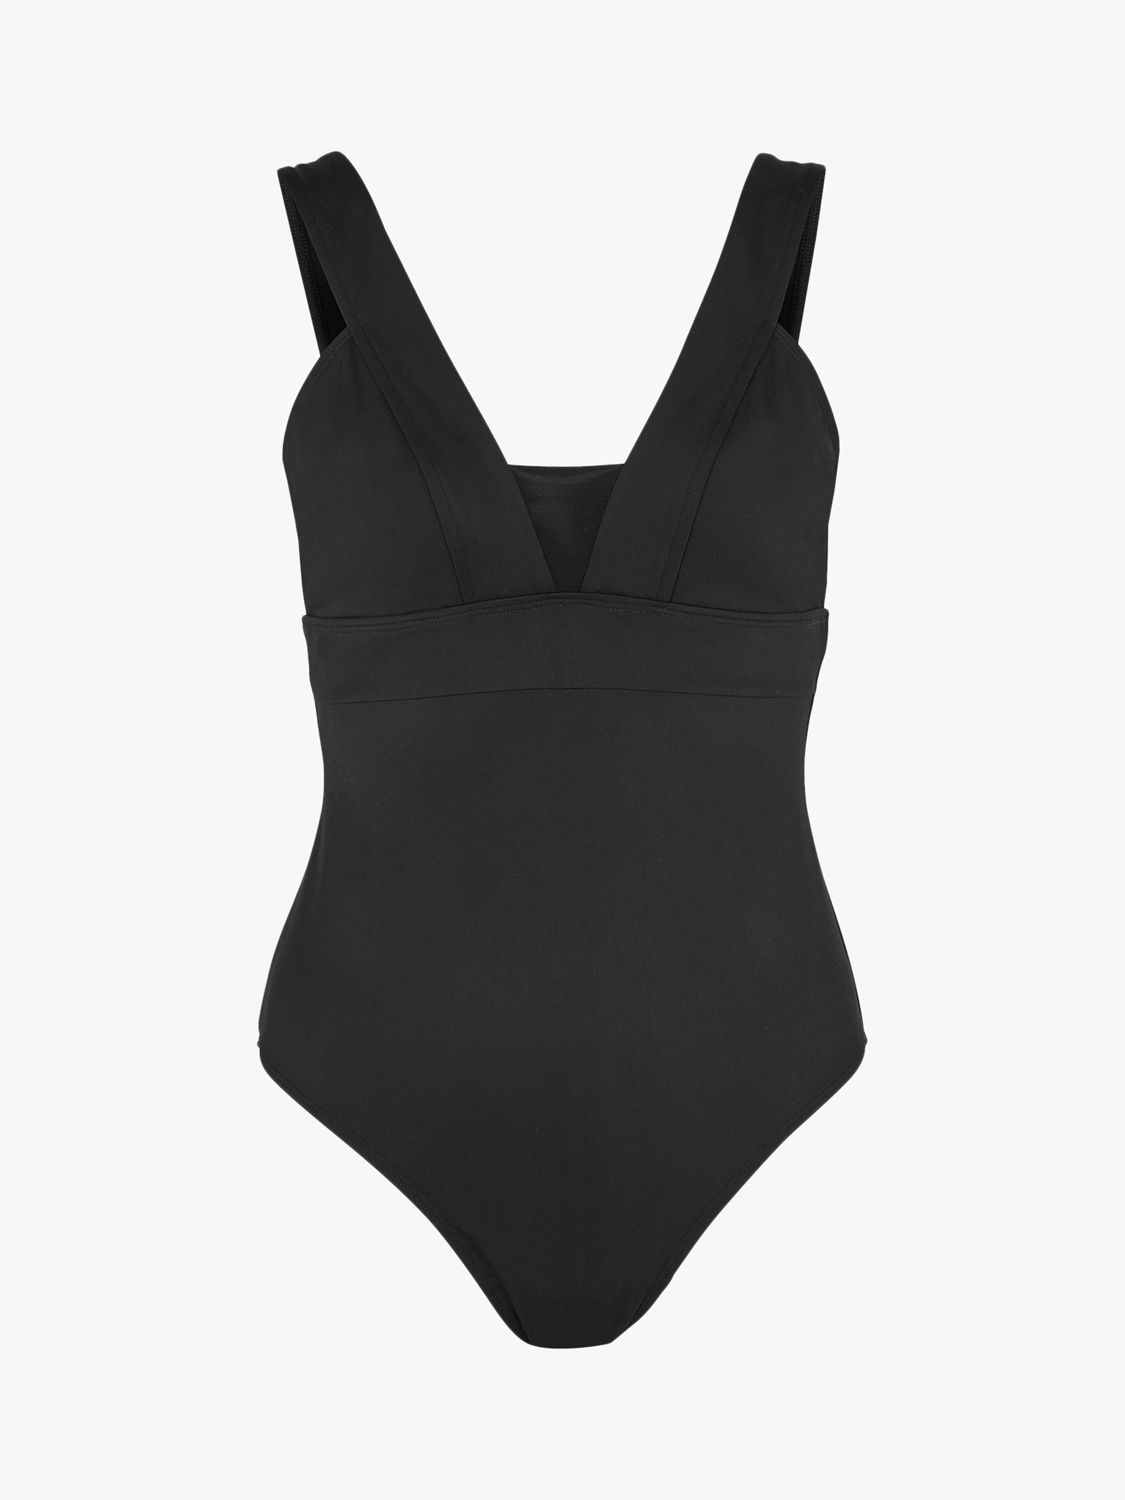 Accessorize Lexi Mesh Shaping Swimsuit, Black at John Lewis & Partners